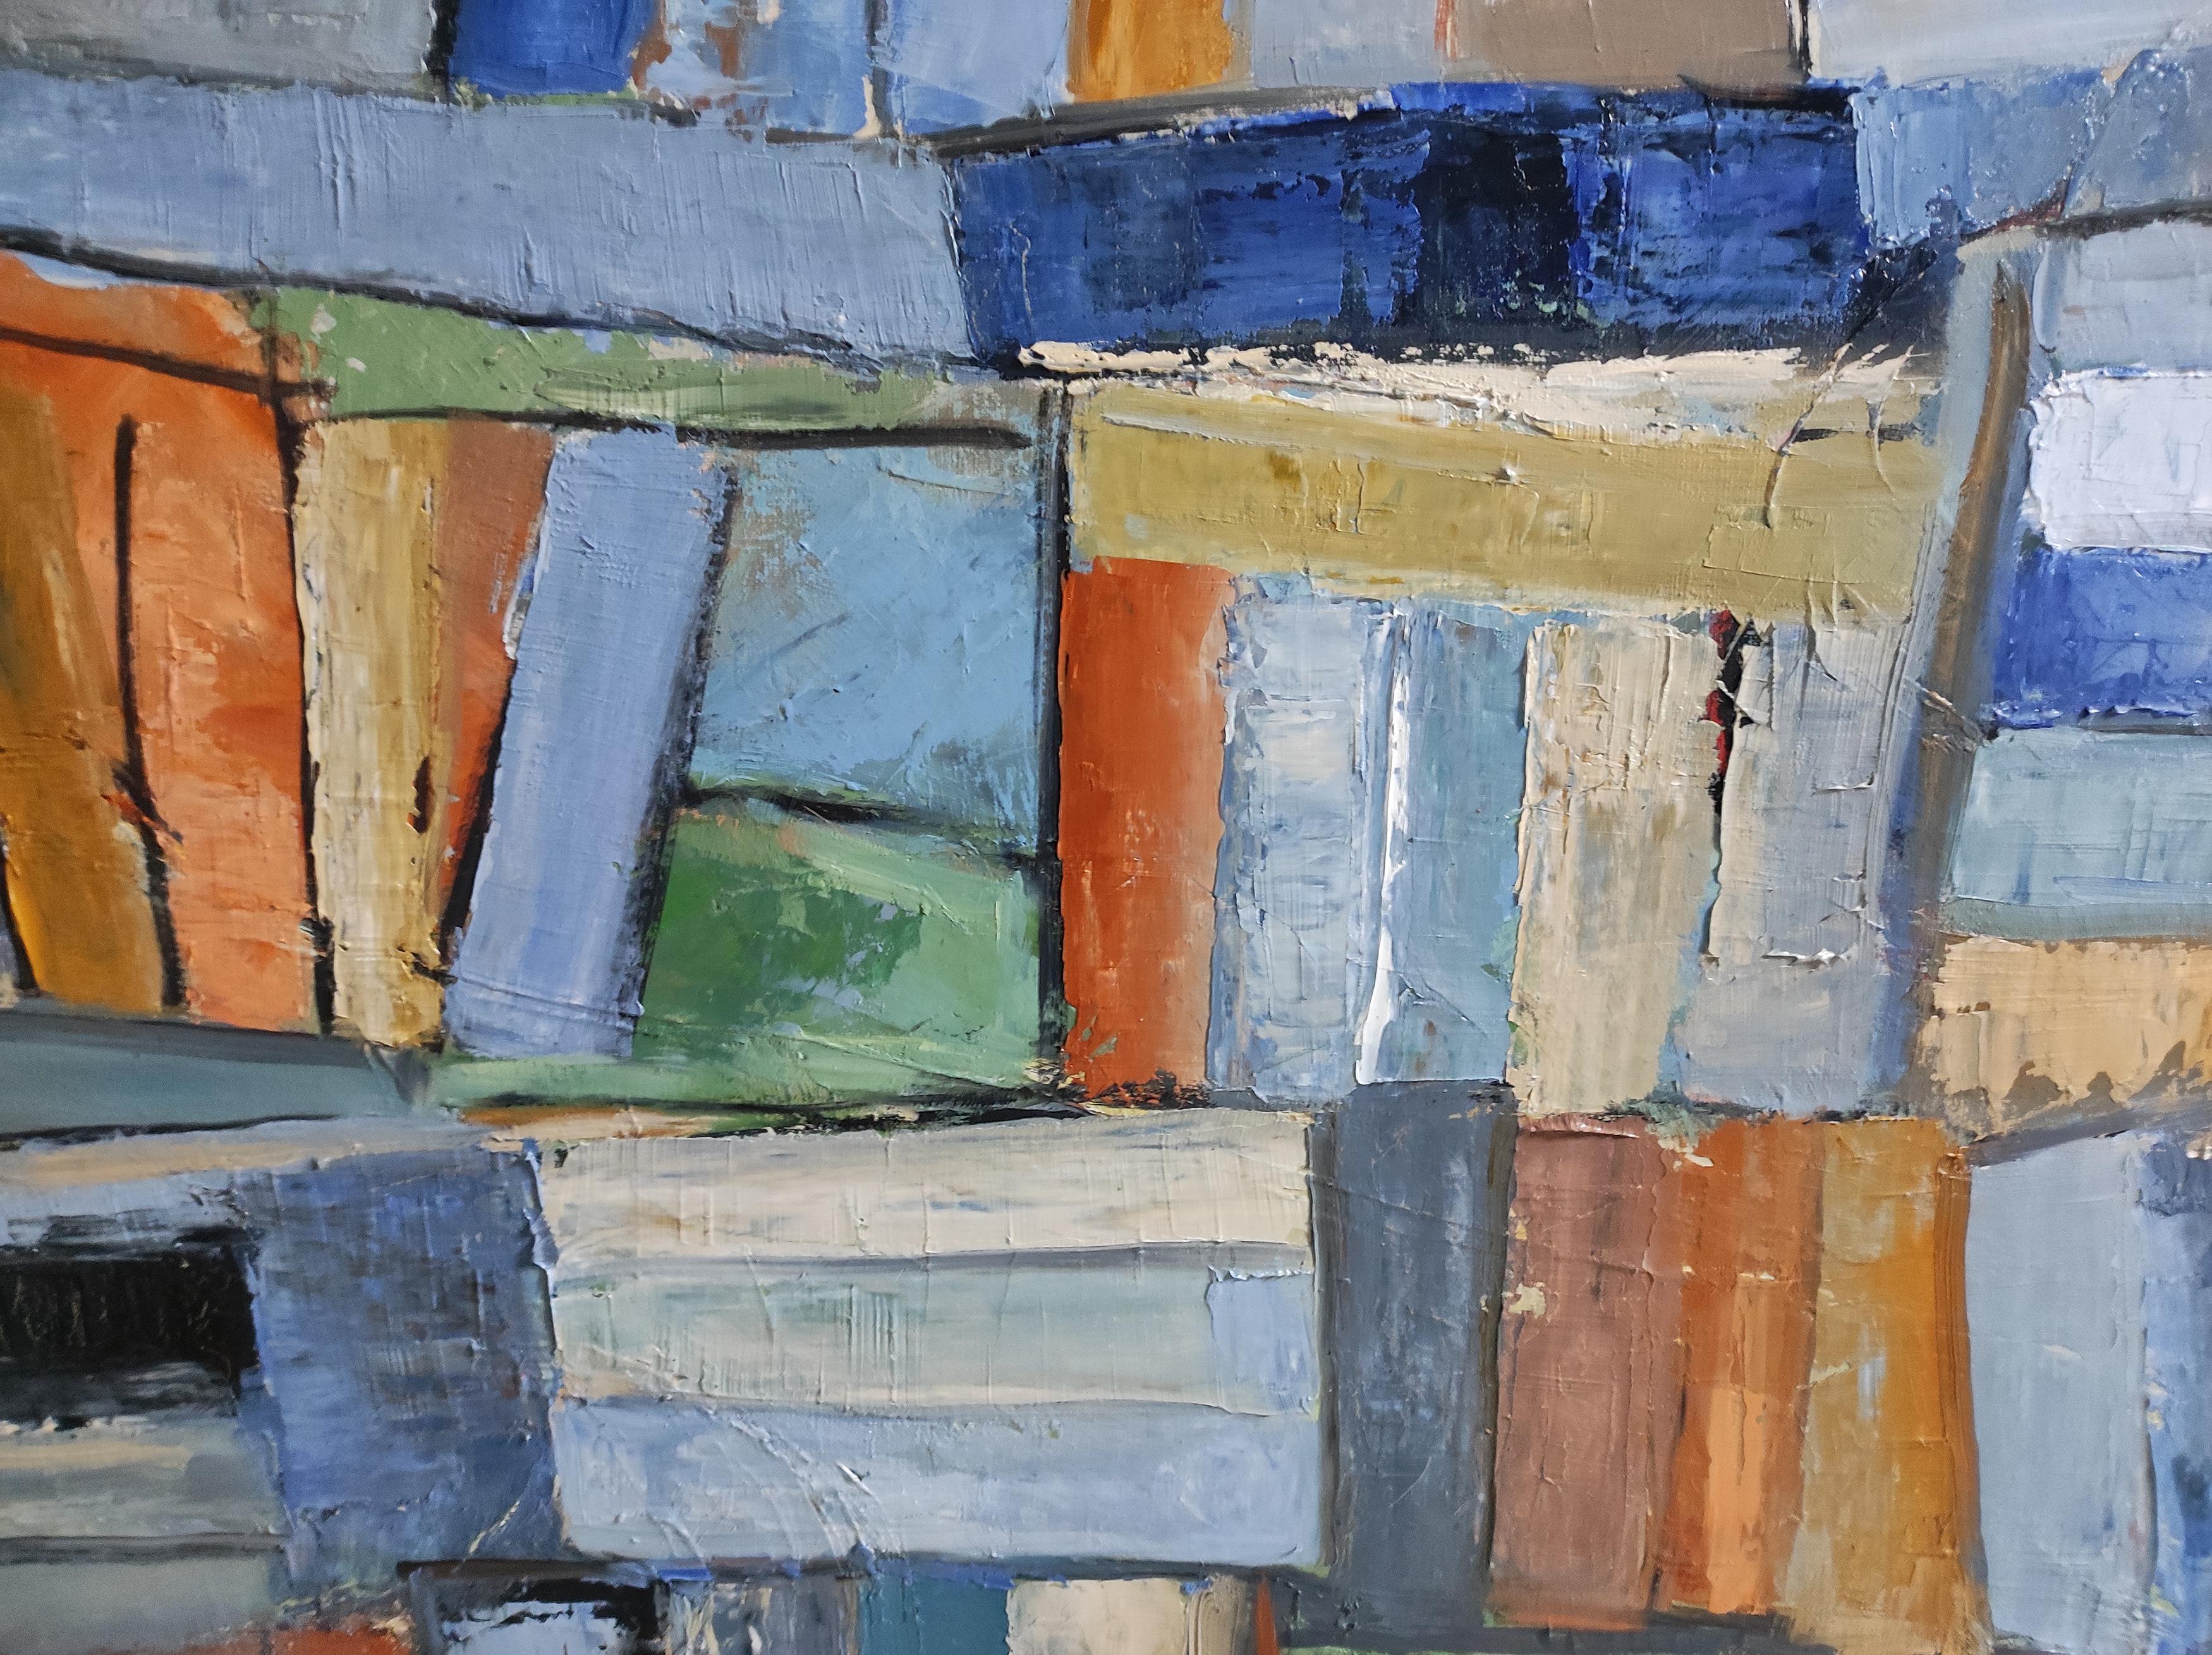 Abstract still life with abstract books. oil on canvas in the series of libraries that the artist has been working on since 2016.
the books are placed here and there in an organized disorder bringing great freedom to the canvas.
painting of a